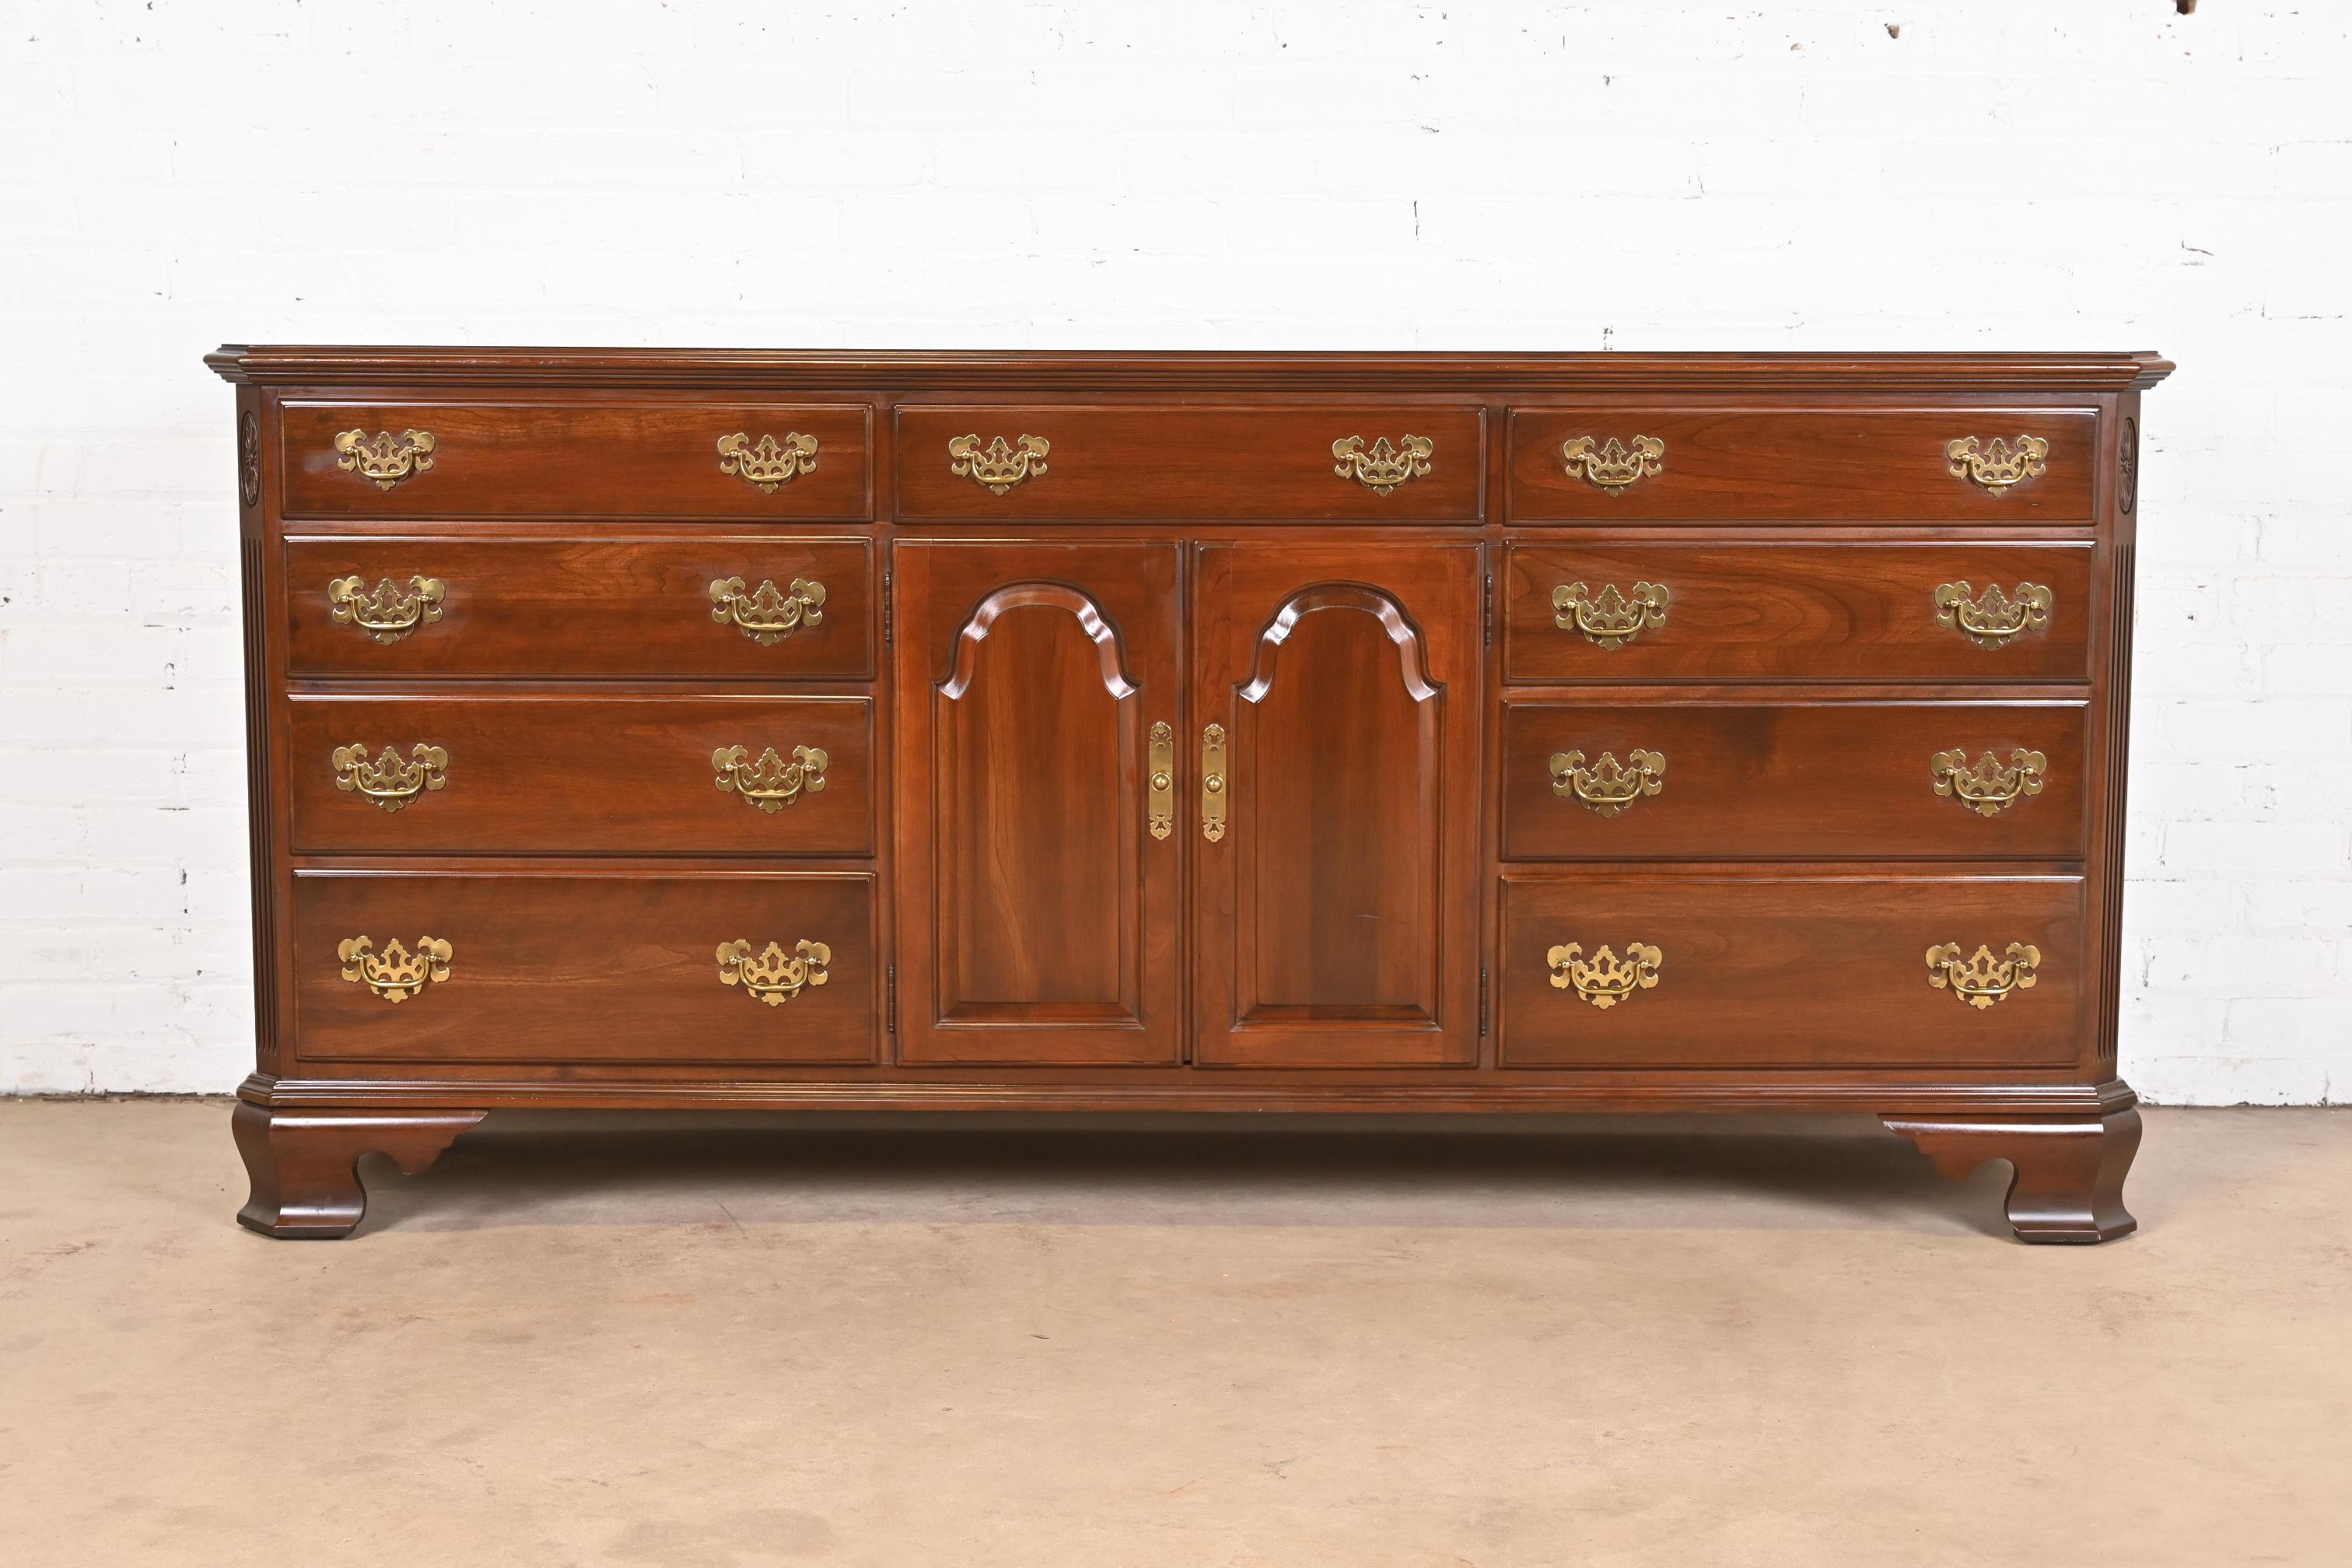 Georgian Solid Cherry Wood Dresser or Credenza In Good Condition For Sale In South Bend, IN